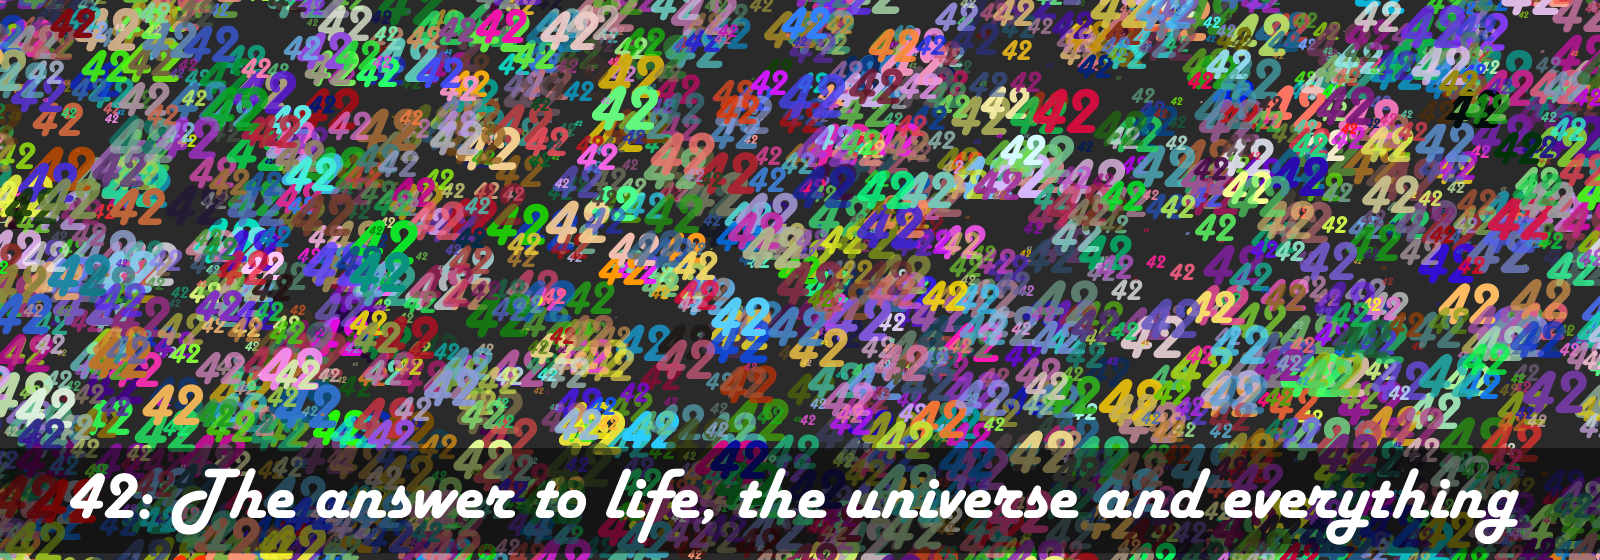 42: The answer to life, the universe and everything